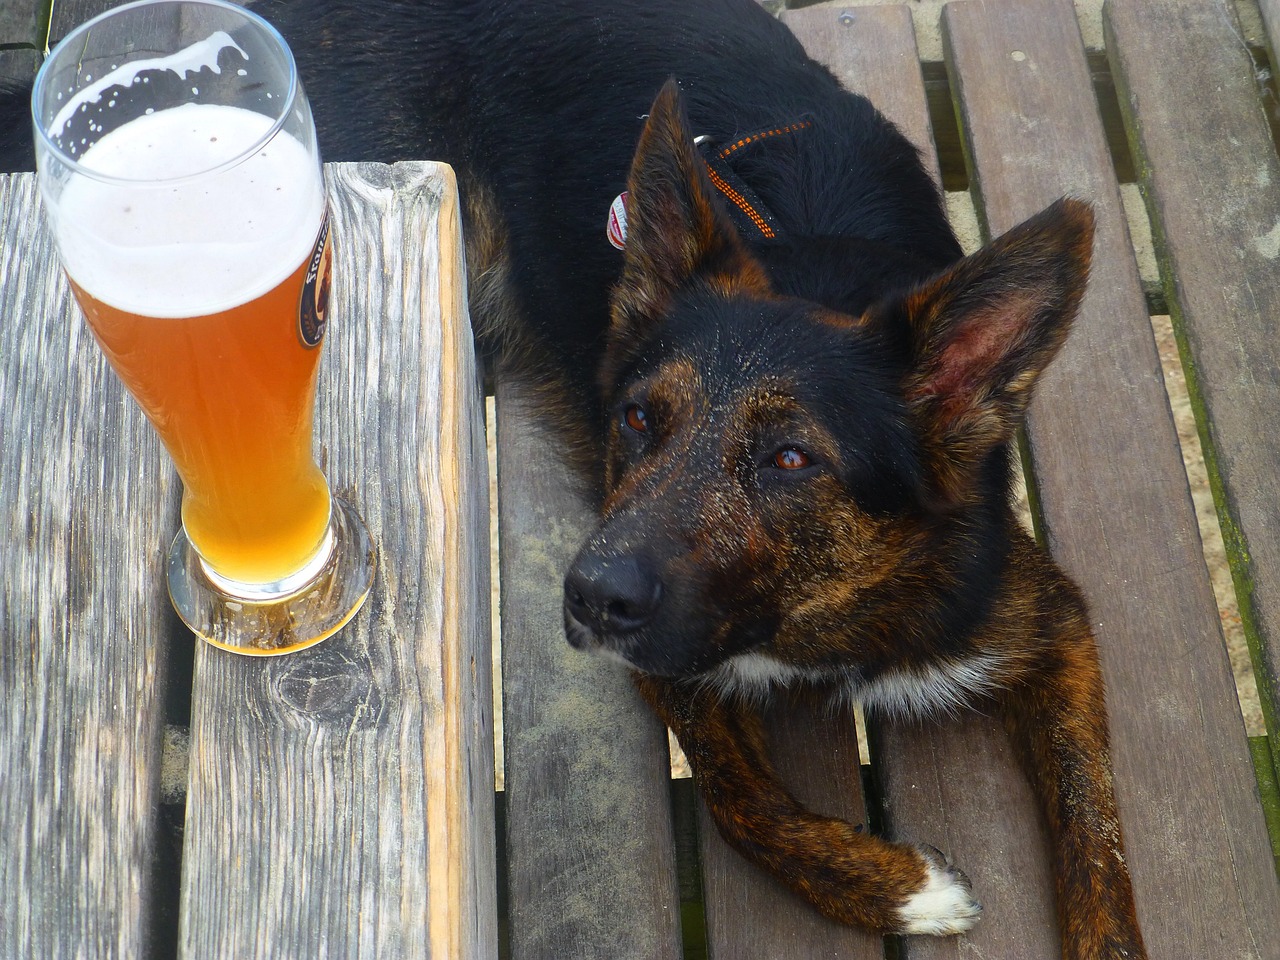 Dog looking at a glass of beer